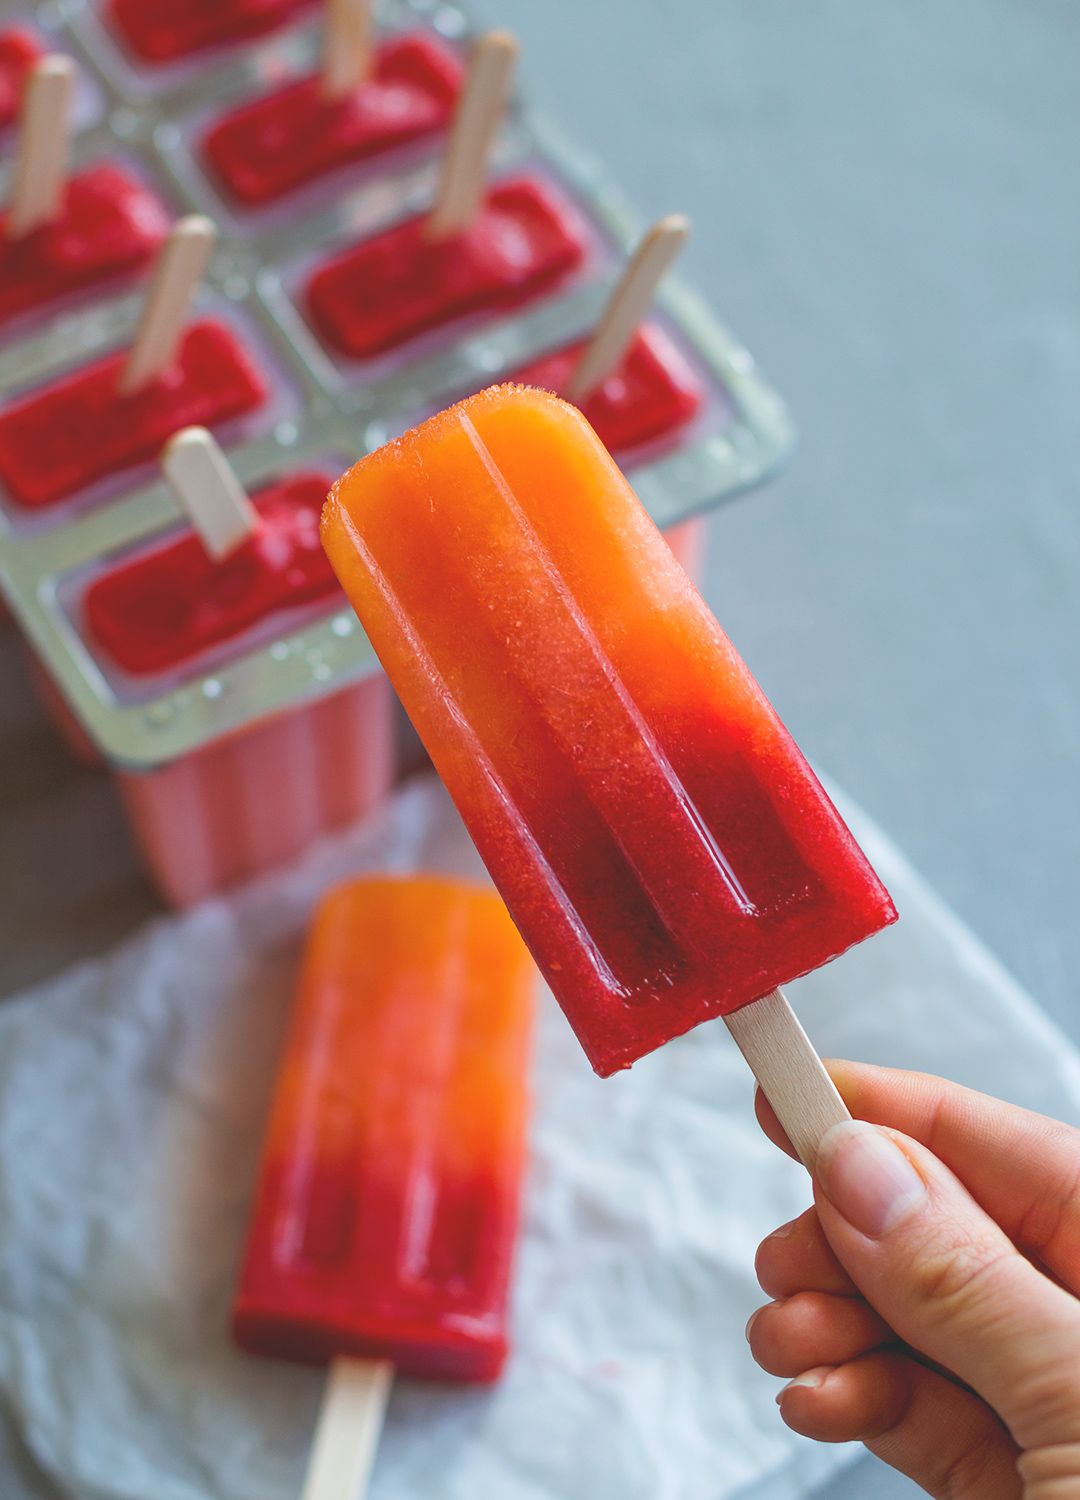 20+ Homemade Popsicle Recipes - How to Make Easy Ice Pops